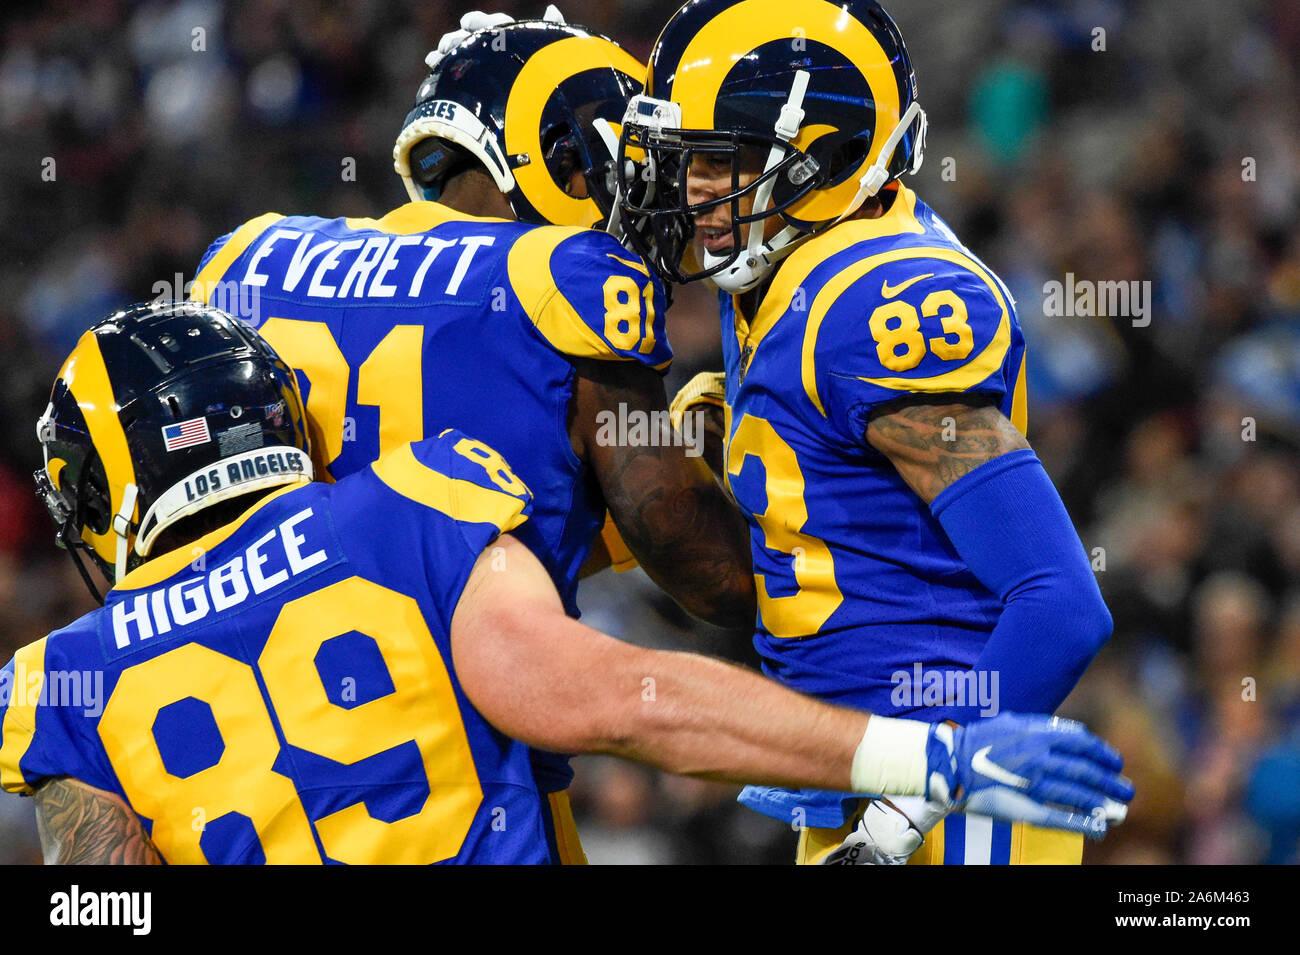 London, UK. 27 October 2019. Rams Wide Receiver, Josh Reynolds (83)  celebrates with Rams Tight End, Gerald Everett (81) and Rams Tight End,  Tyler Higbee (89) after scoring during the NFL match